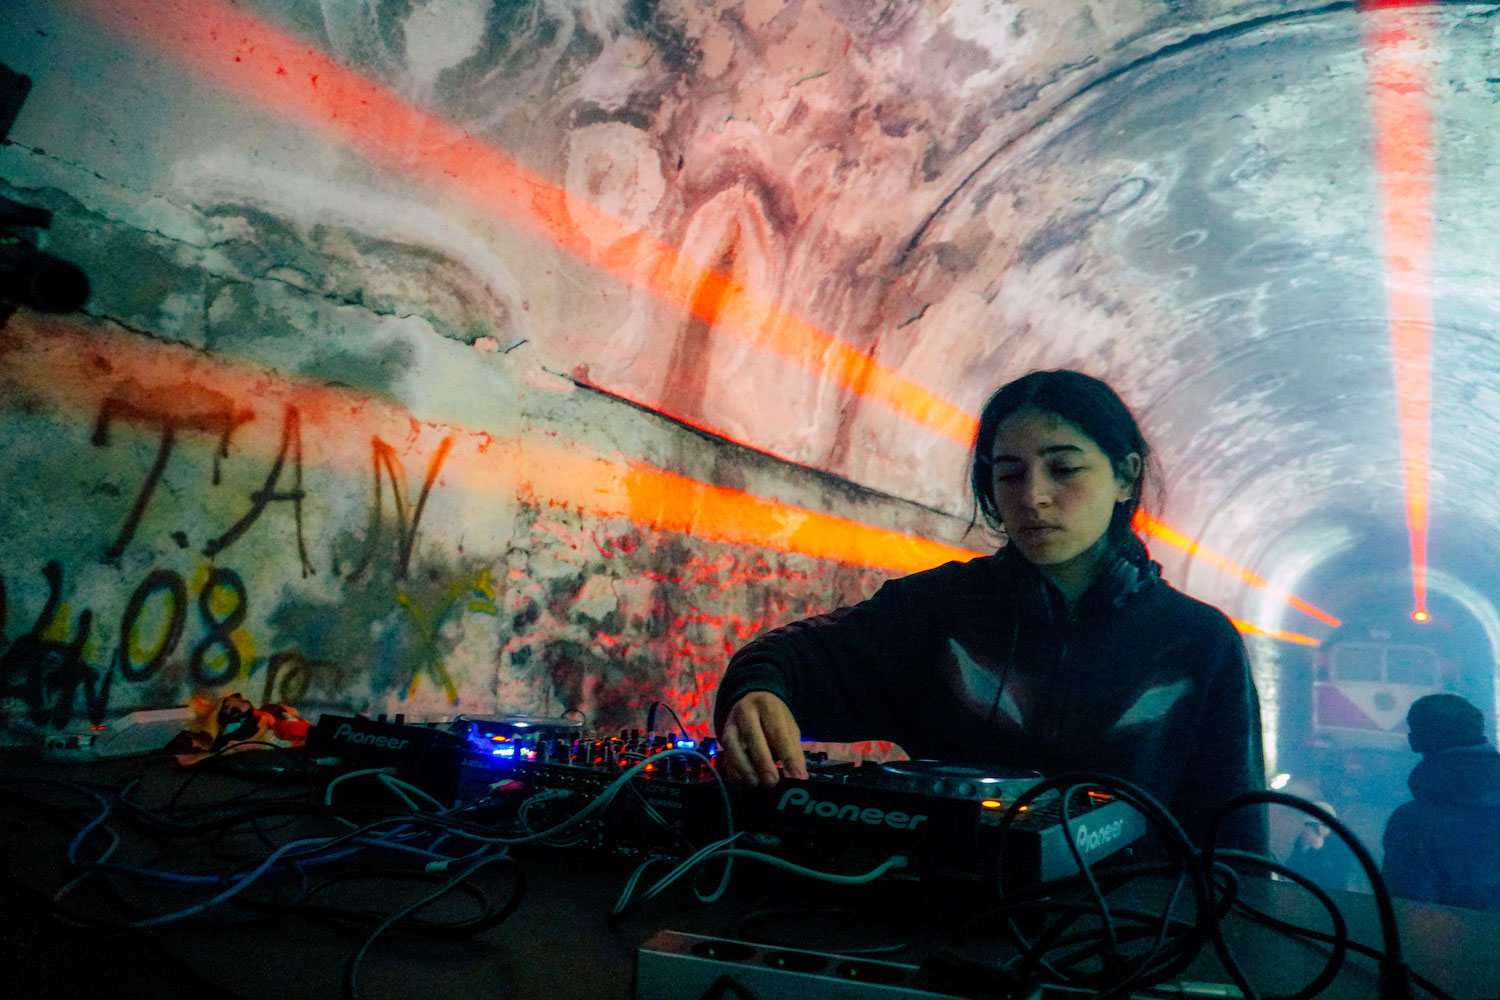 An underground festival gig at an abandoned building in Armenia. Image: Courtesy of Uvakan